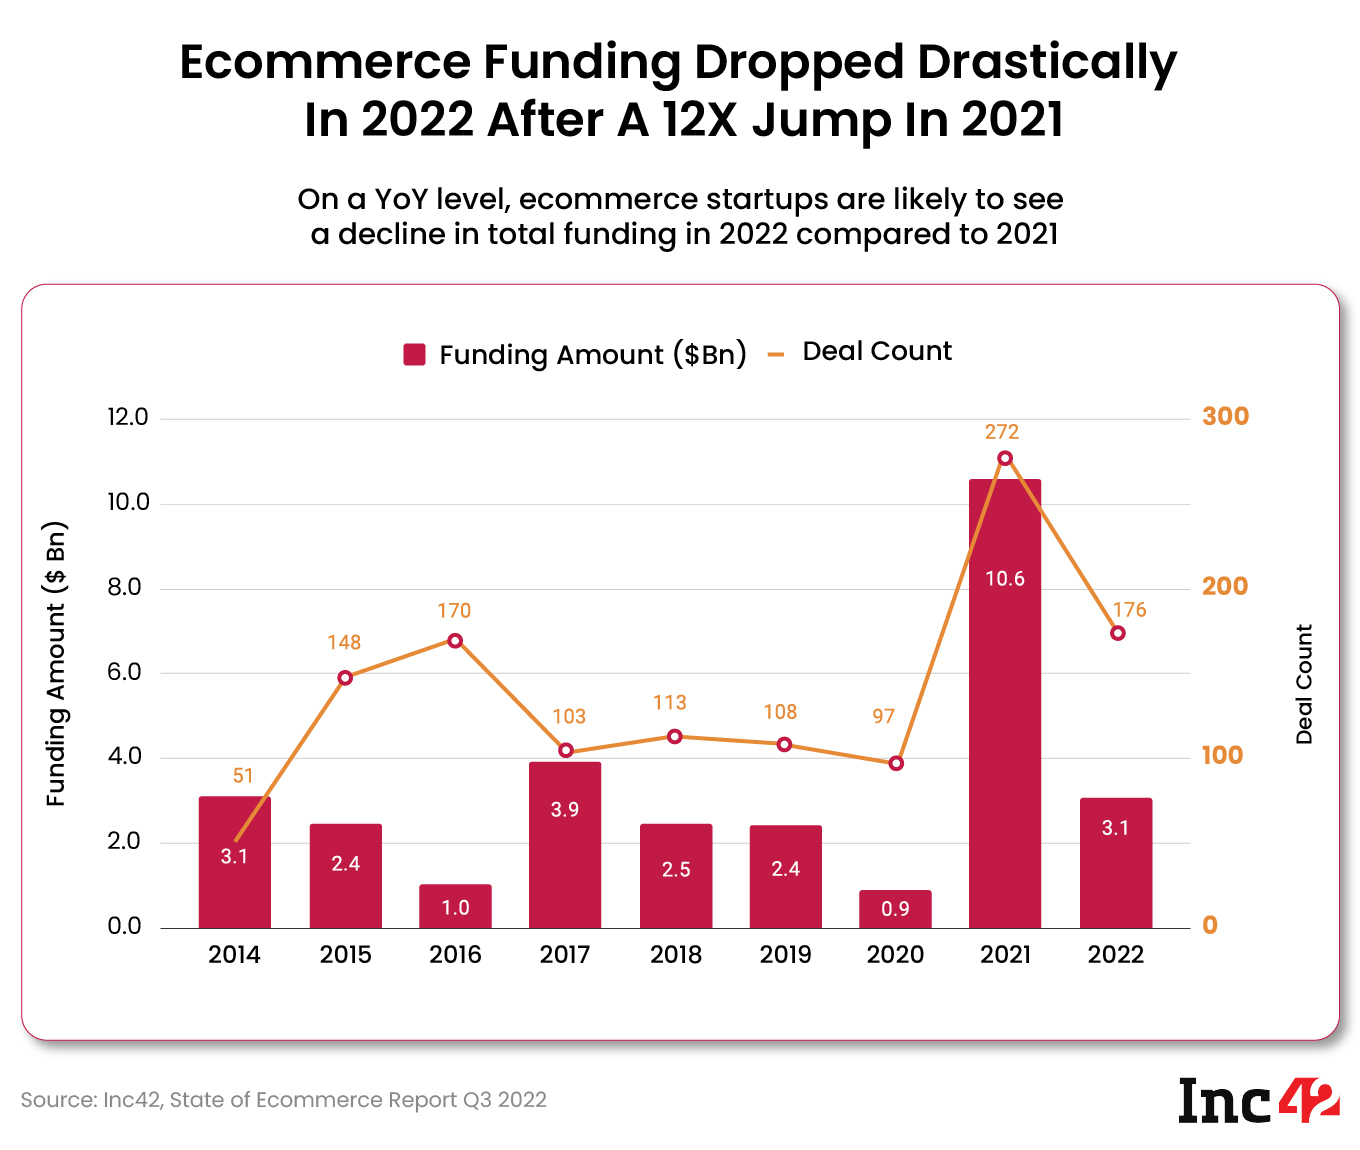 Ecommerce funding dropped drastically in 2022 after a 12x jump in 2021